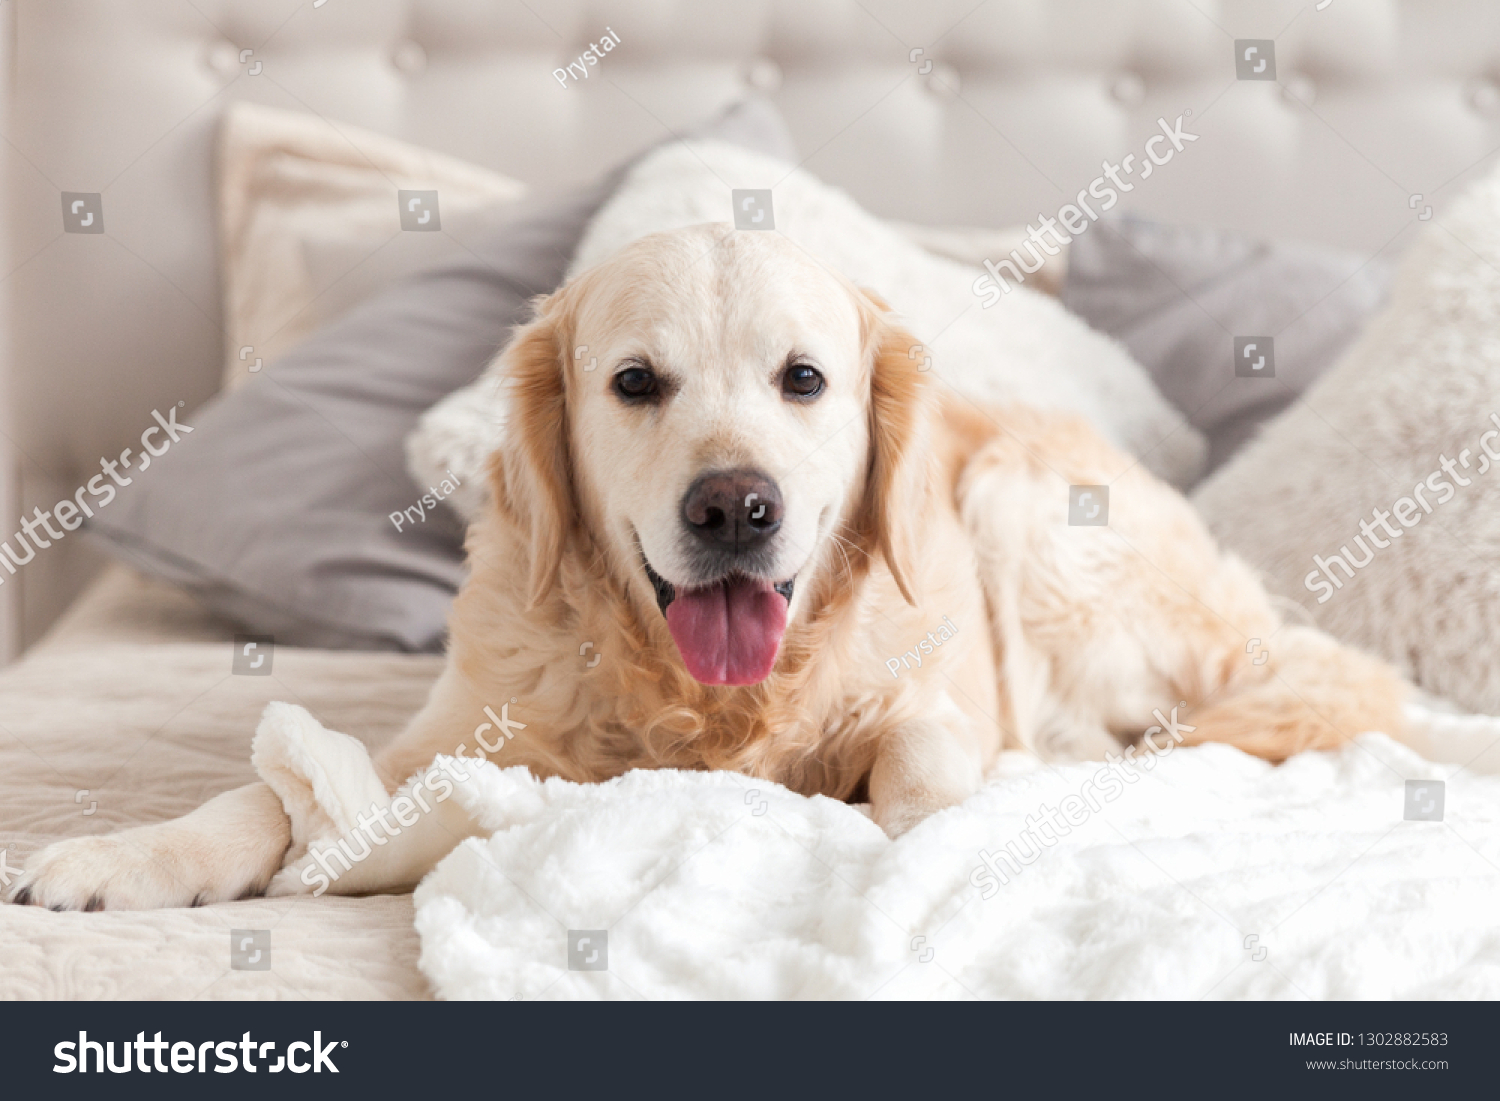 Happy smiling golden retriever puppy dog in luxurious bright colors classic eclectic style bedroom with king-size bed and bedside table. Pets friendly  hotel or home room. Copy space, empty for text. #1302882583